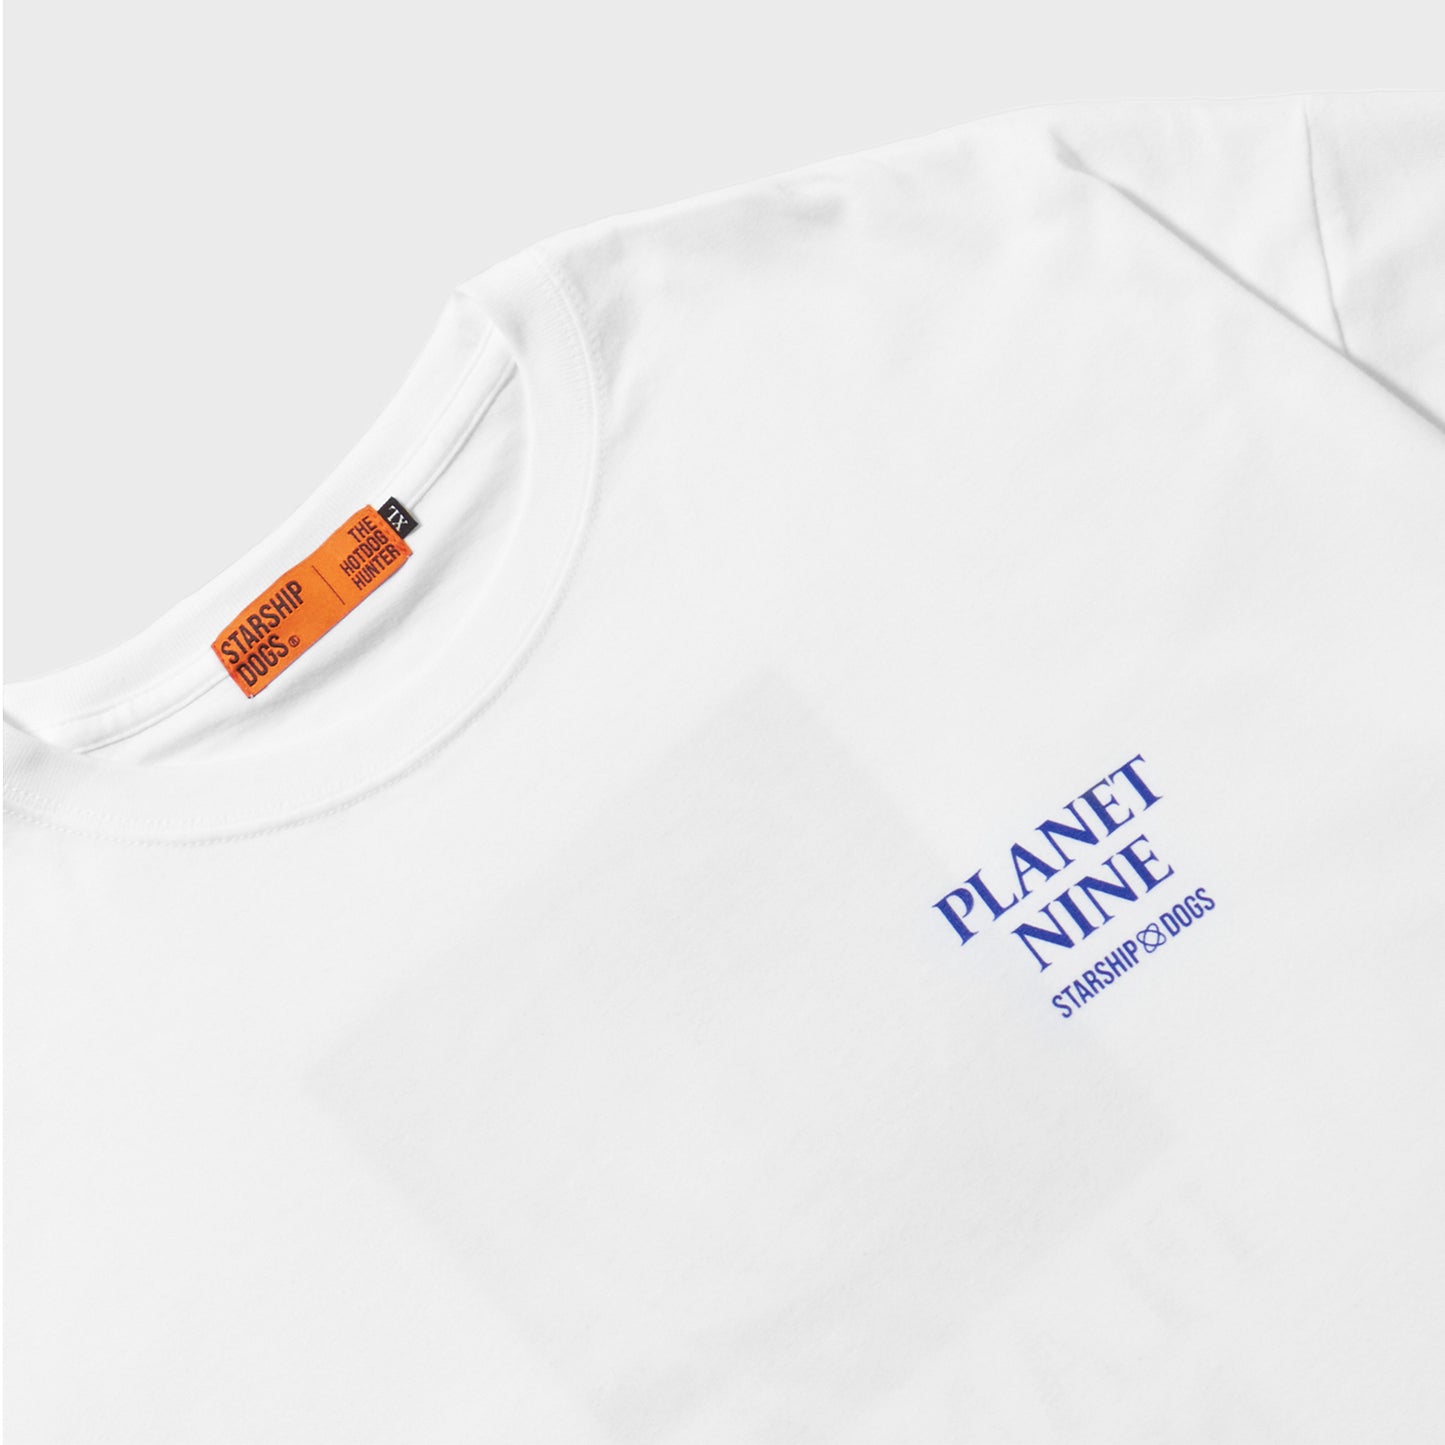 Zoomed-In on the Print Section of the Product: A short-sleeve T-shirt in body color white. On the left chest, 'PLANET NINE STARSHIP DOGS' is written, with the text color in blue. An orange brand tag of STARSHIP DOGS is stitched on the inside of the collar.